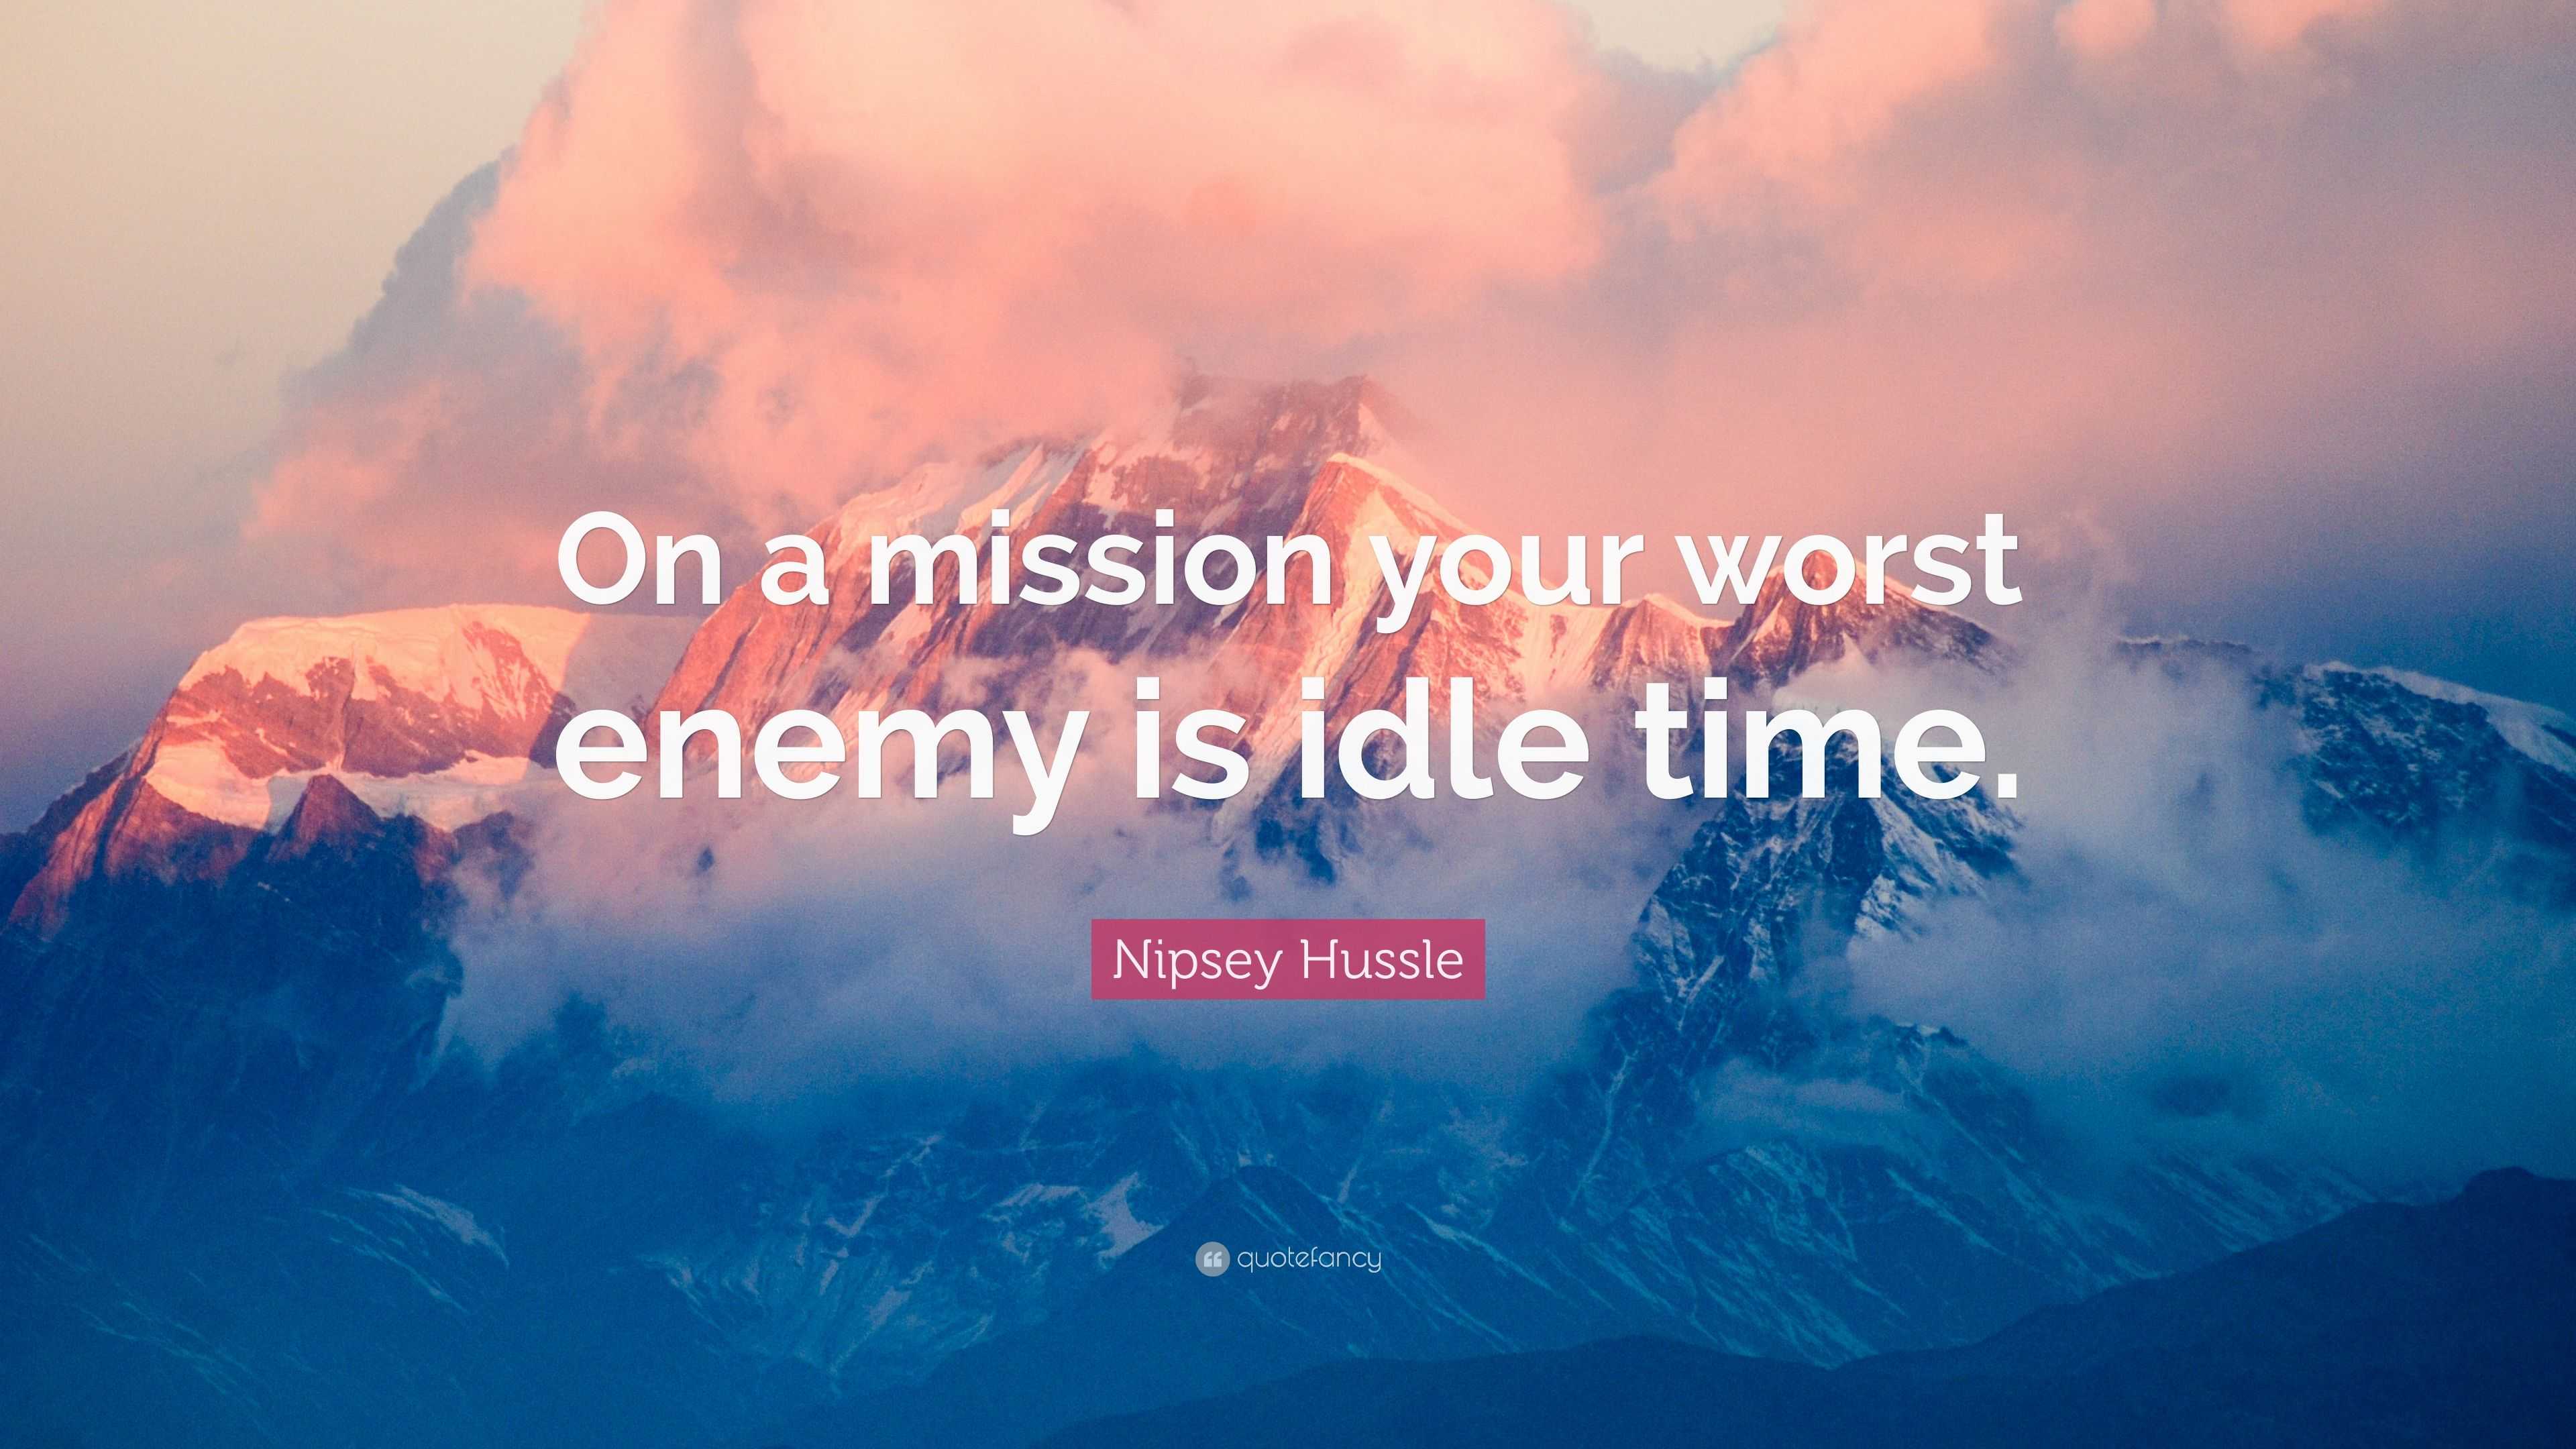 On a mission your worst enemy is idle time: by Enough, IAM